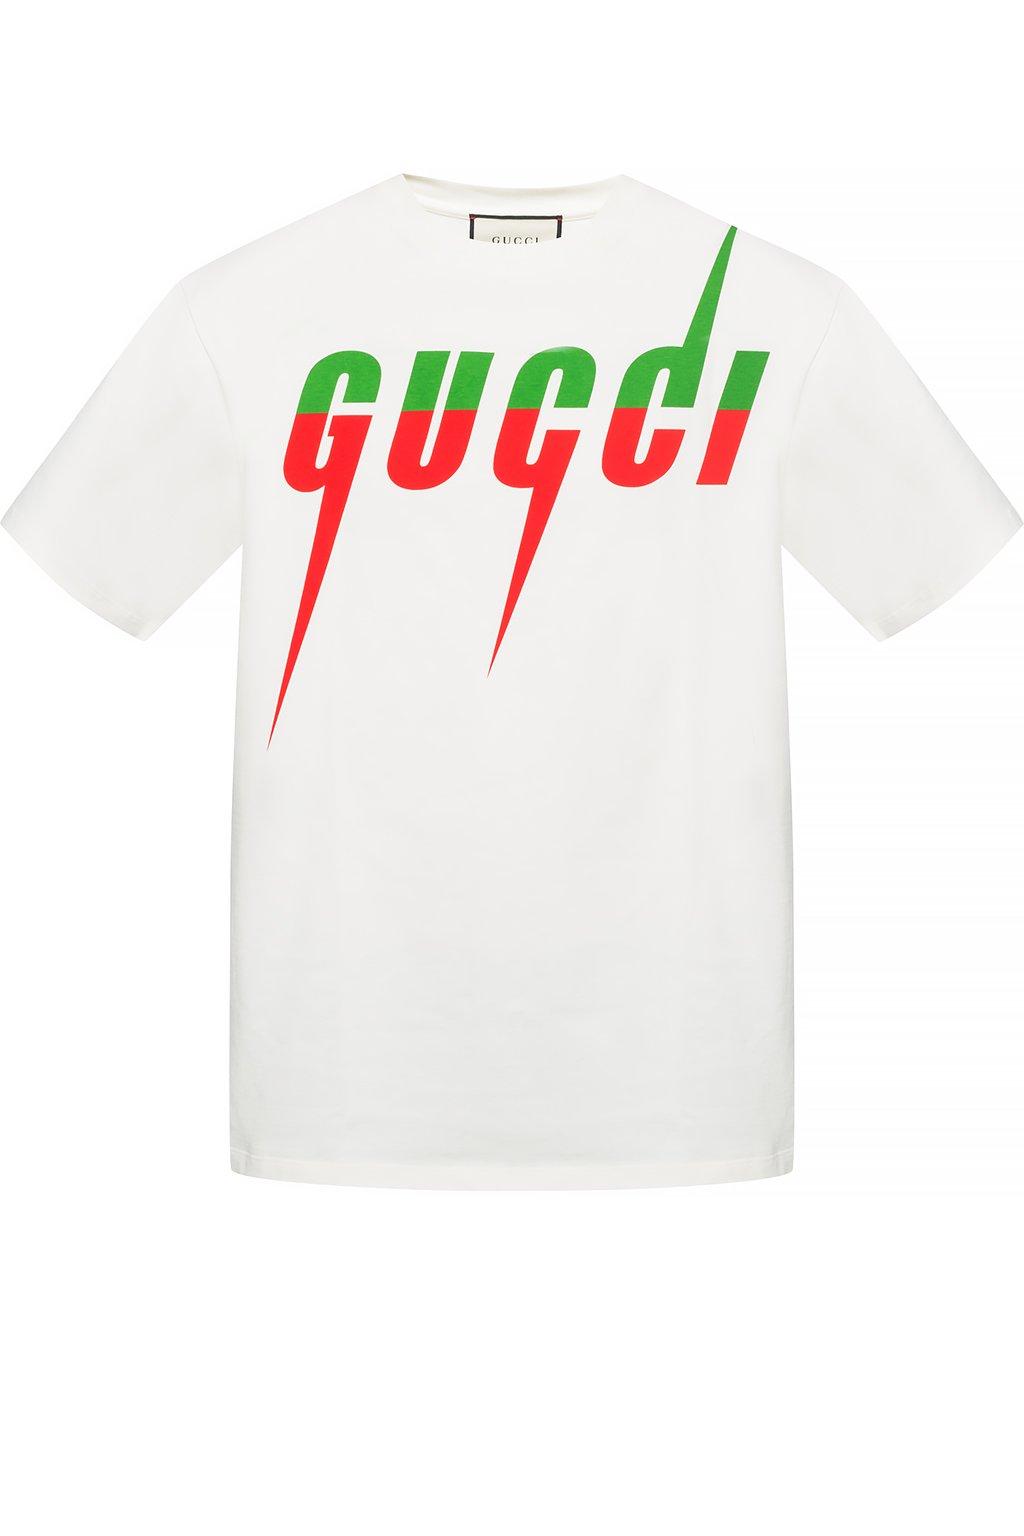 Gucci Logo-printed Cotton T-shirt in White for Men - Lyst